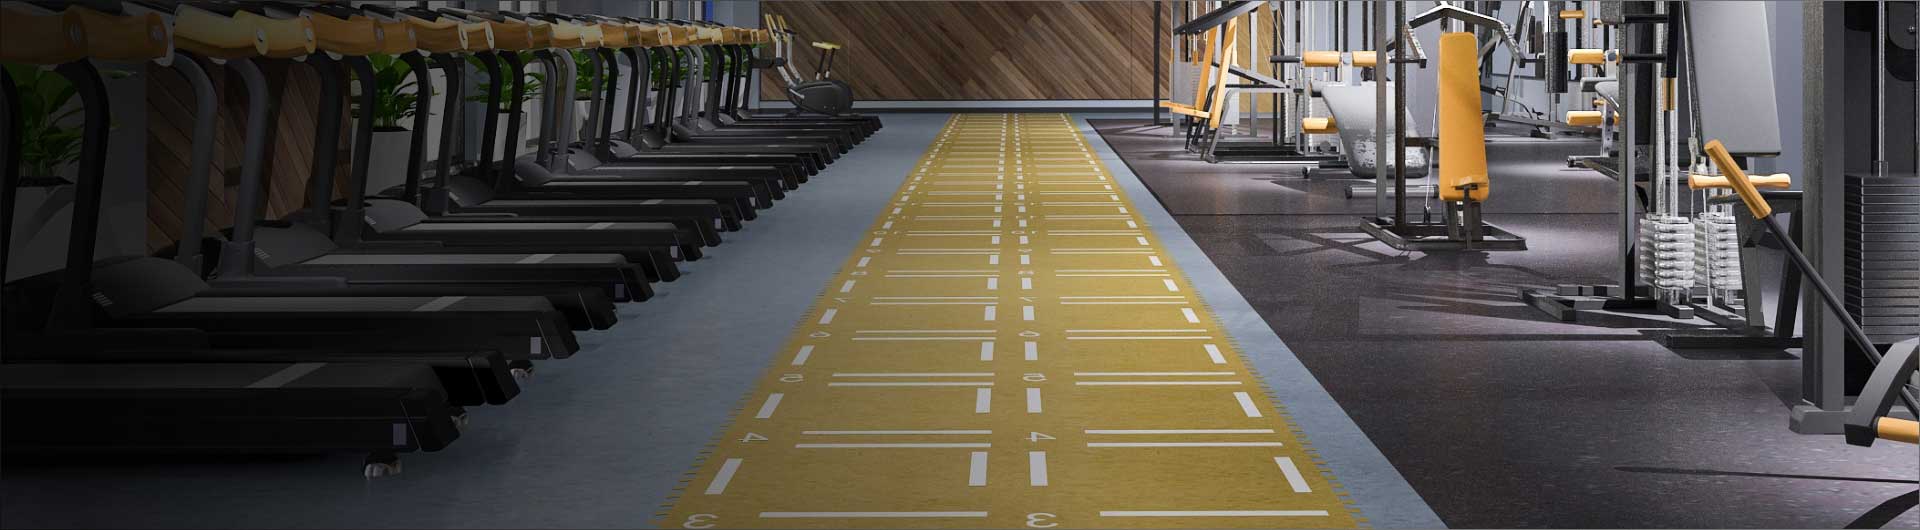 Rubber Flooring for Fitness Space